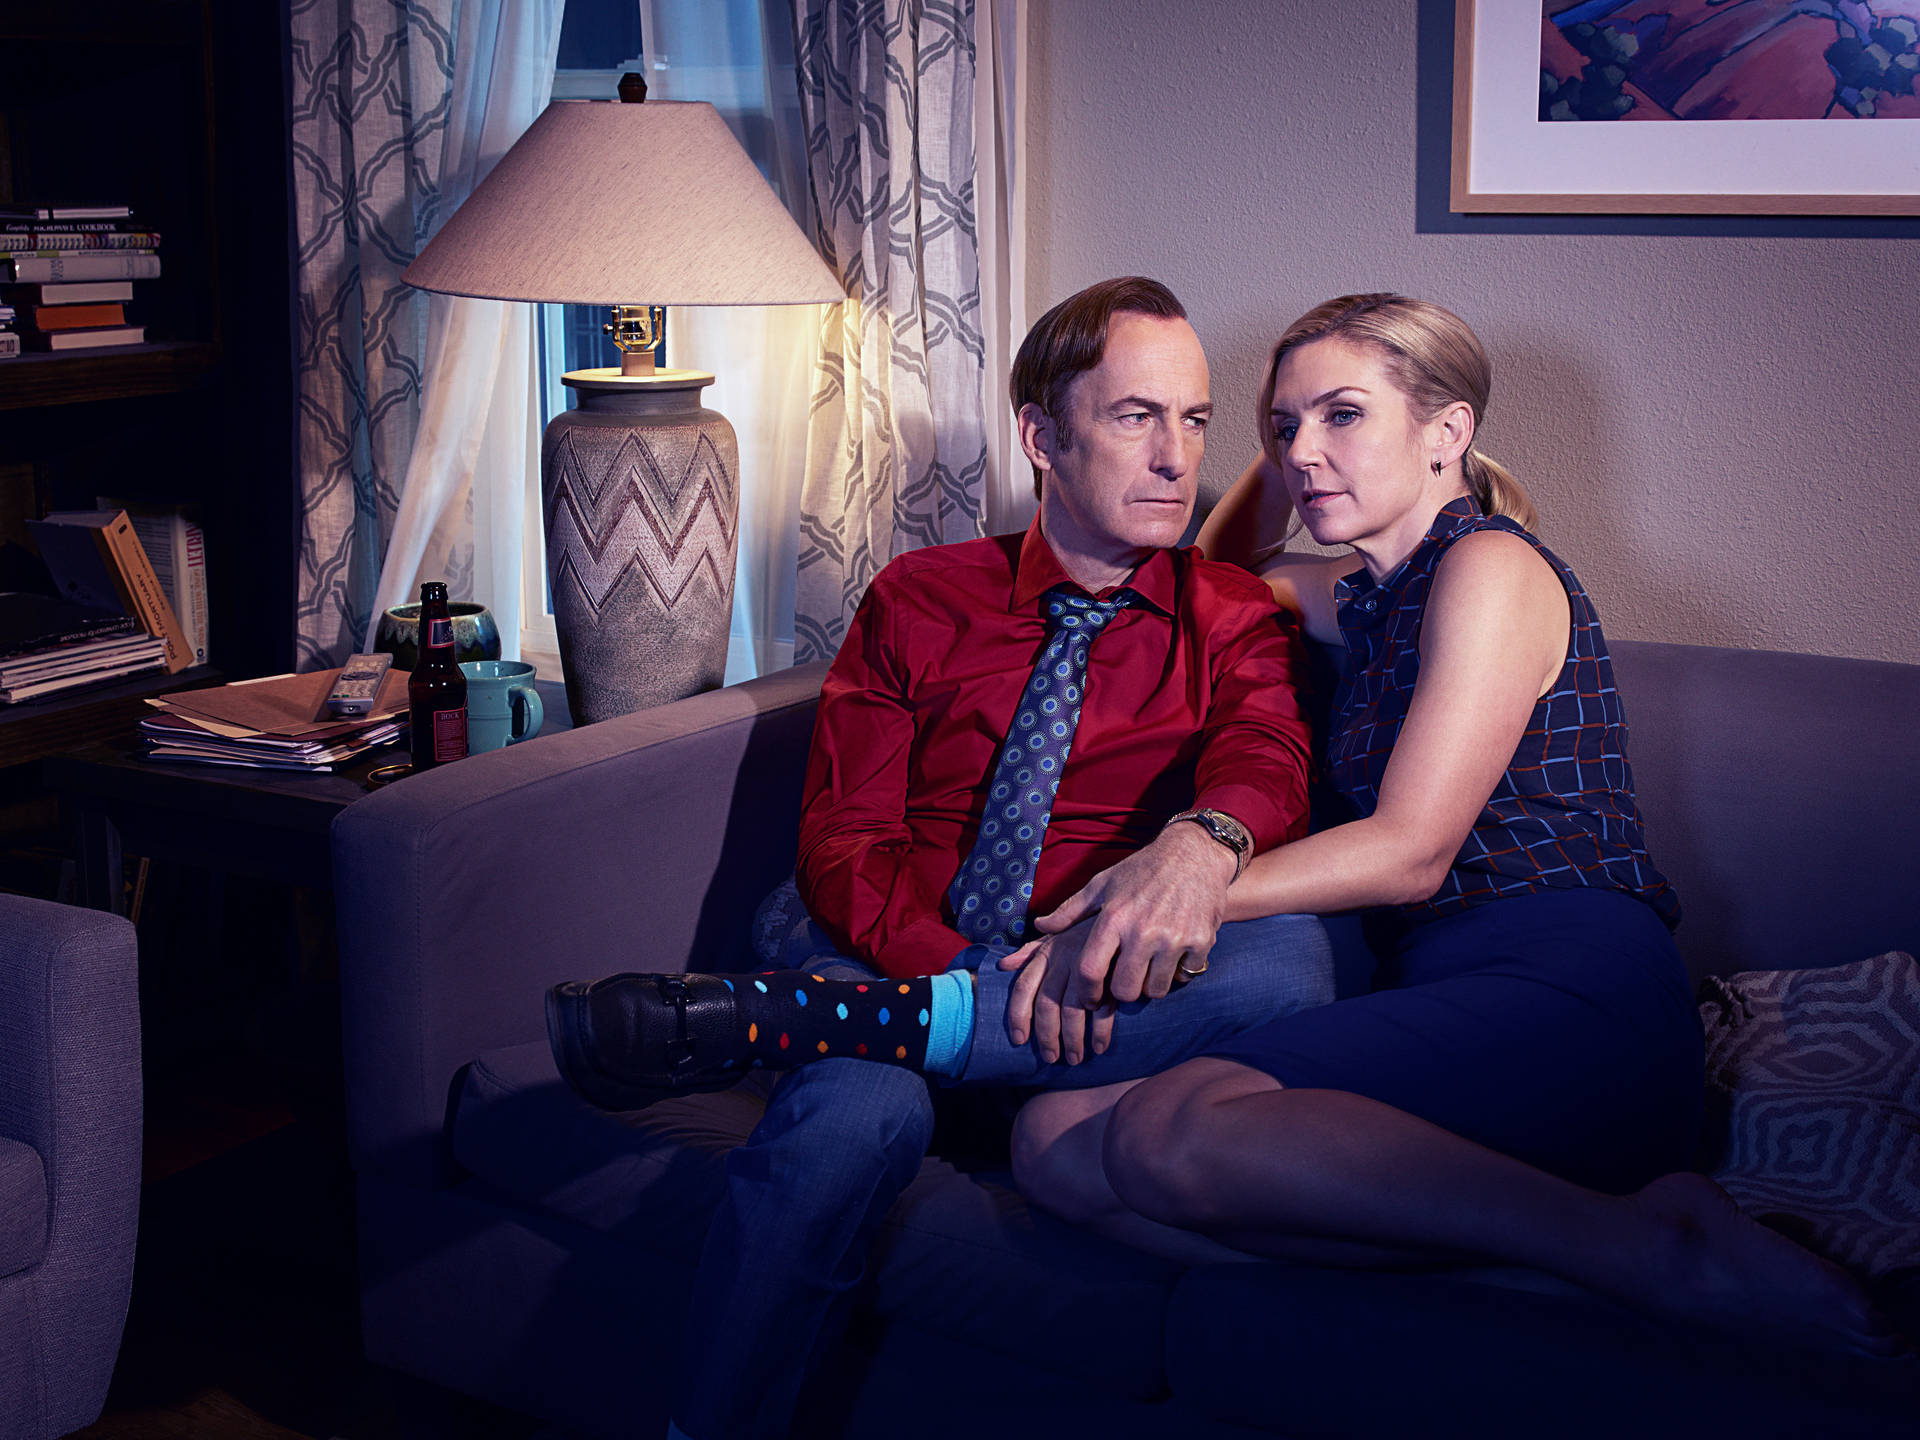 Caption: A Pivotal Moment Between Jimmy Mcgill And His Partner, Kim Wexler, In Better Call Saul.